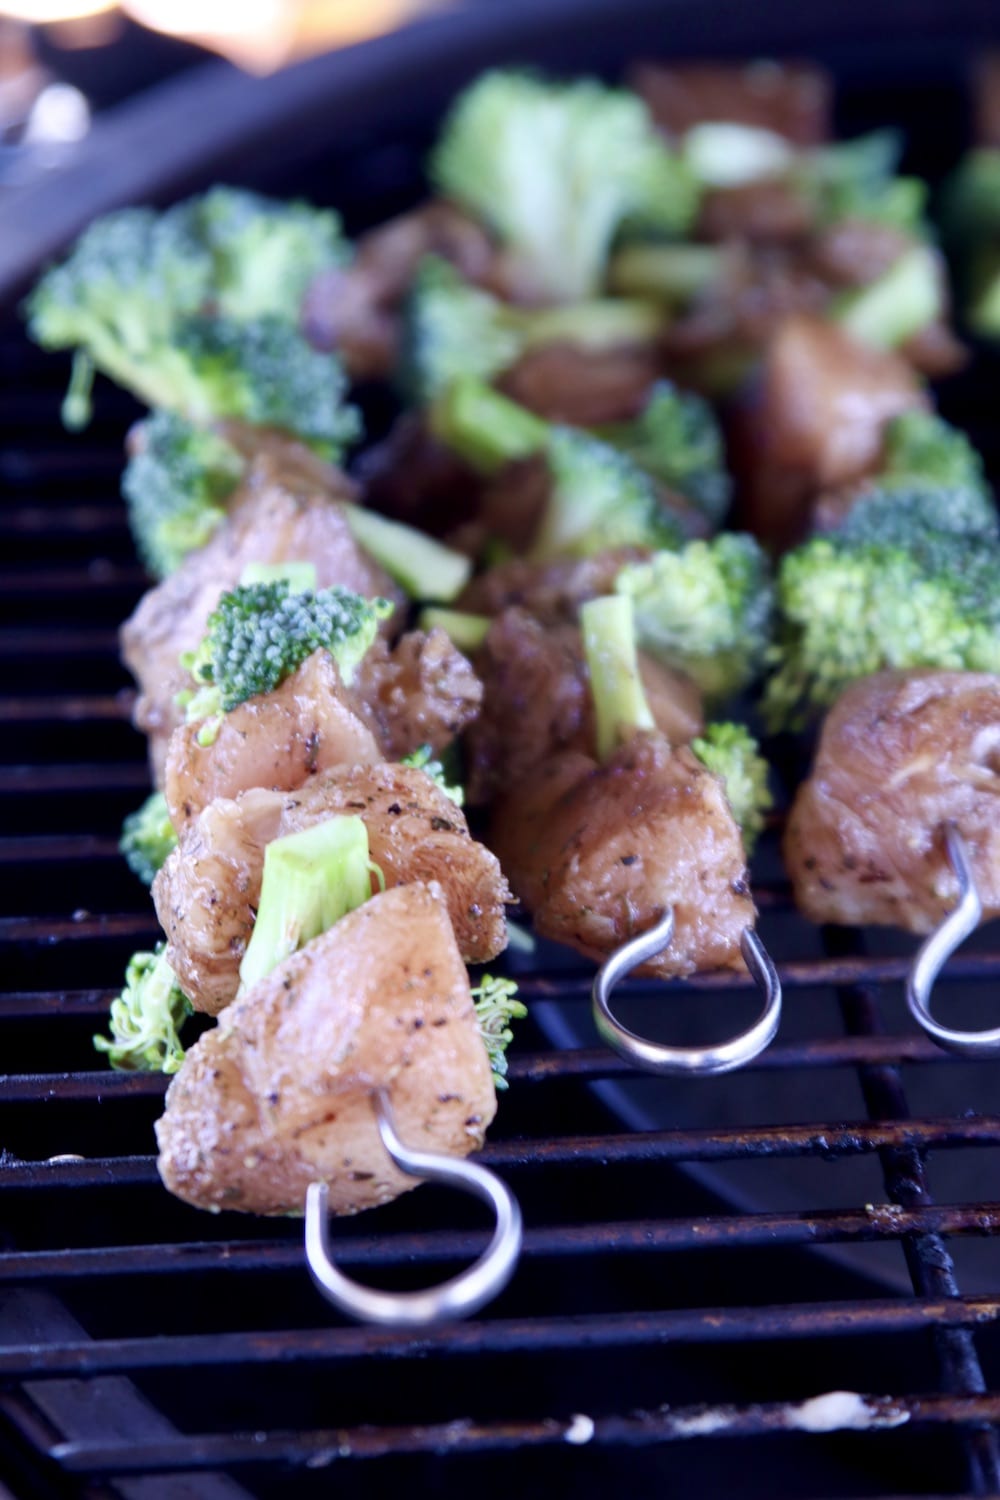 Chicken and Broccoli Skewers on the Grill